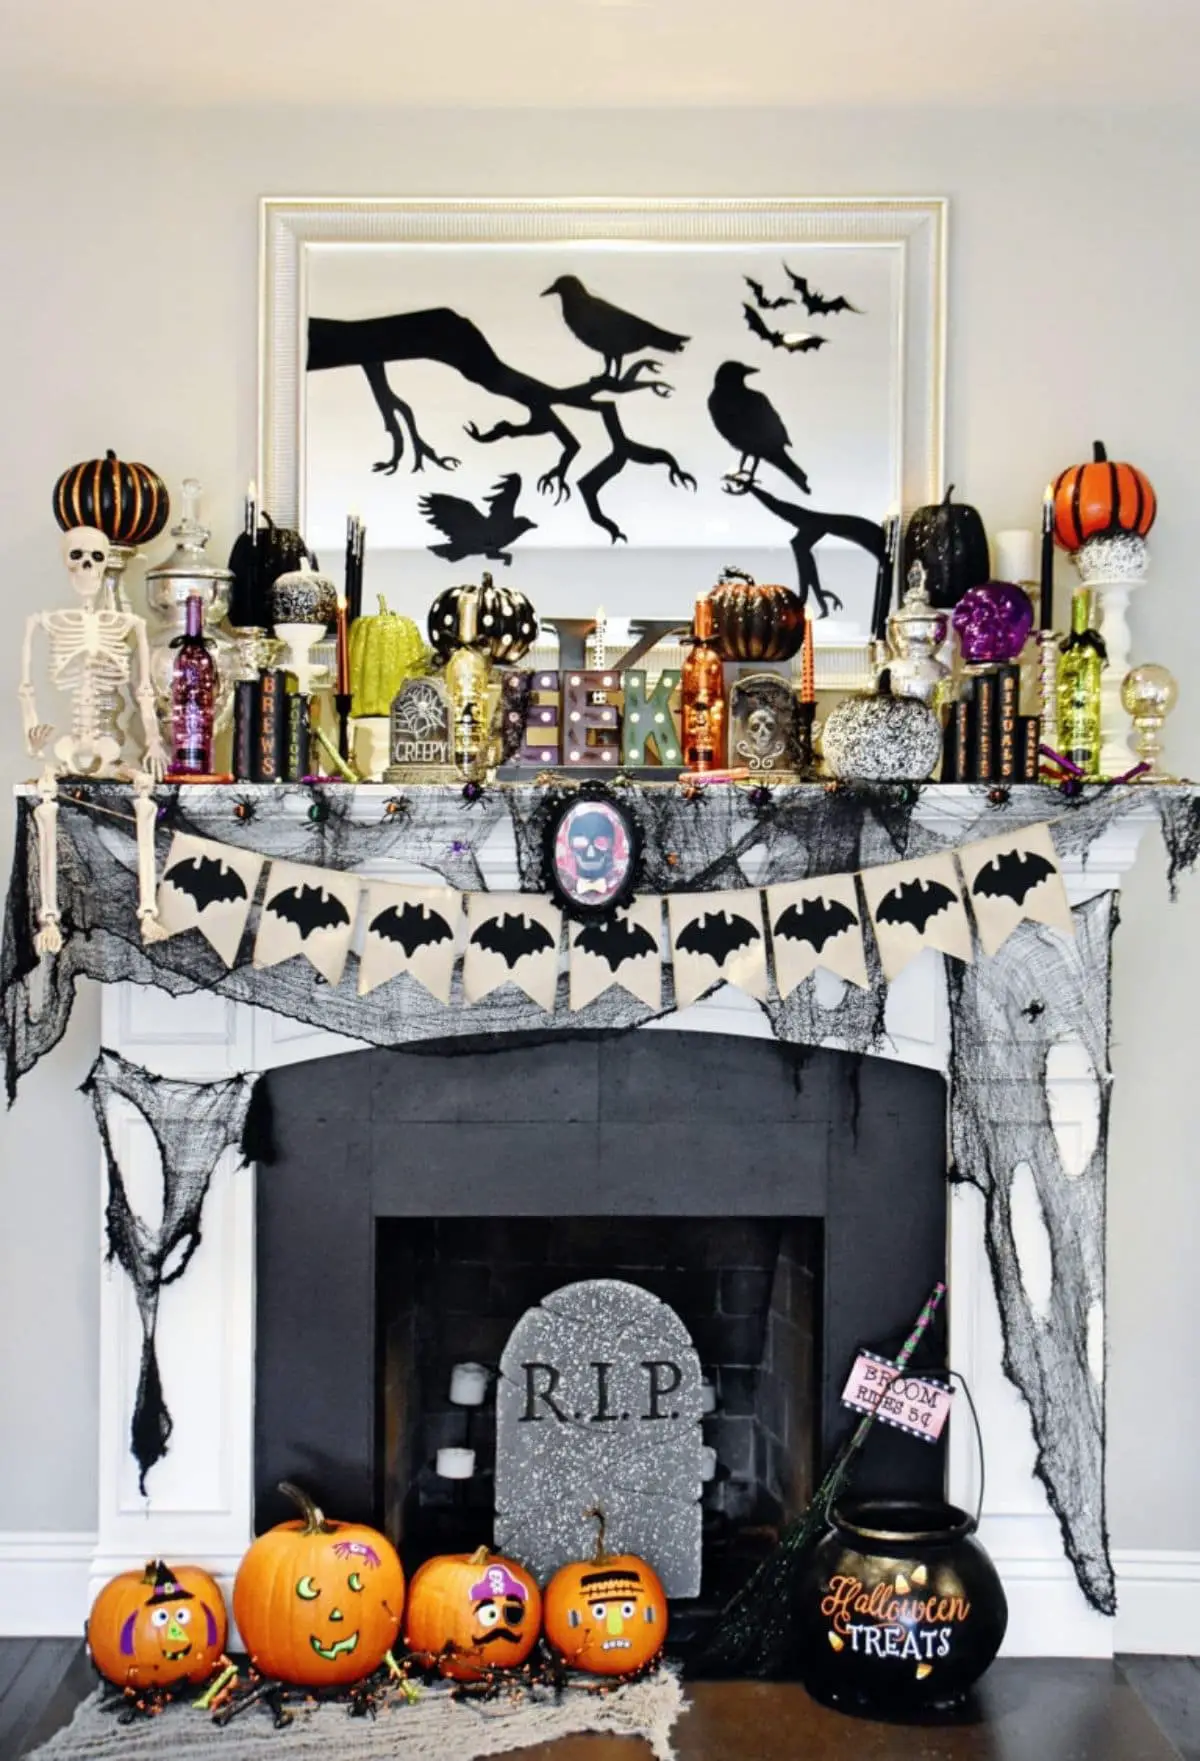 mantel with RIP headstone and lots of pumpkins